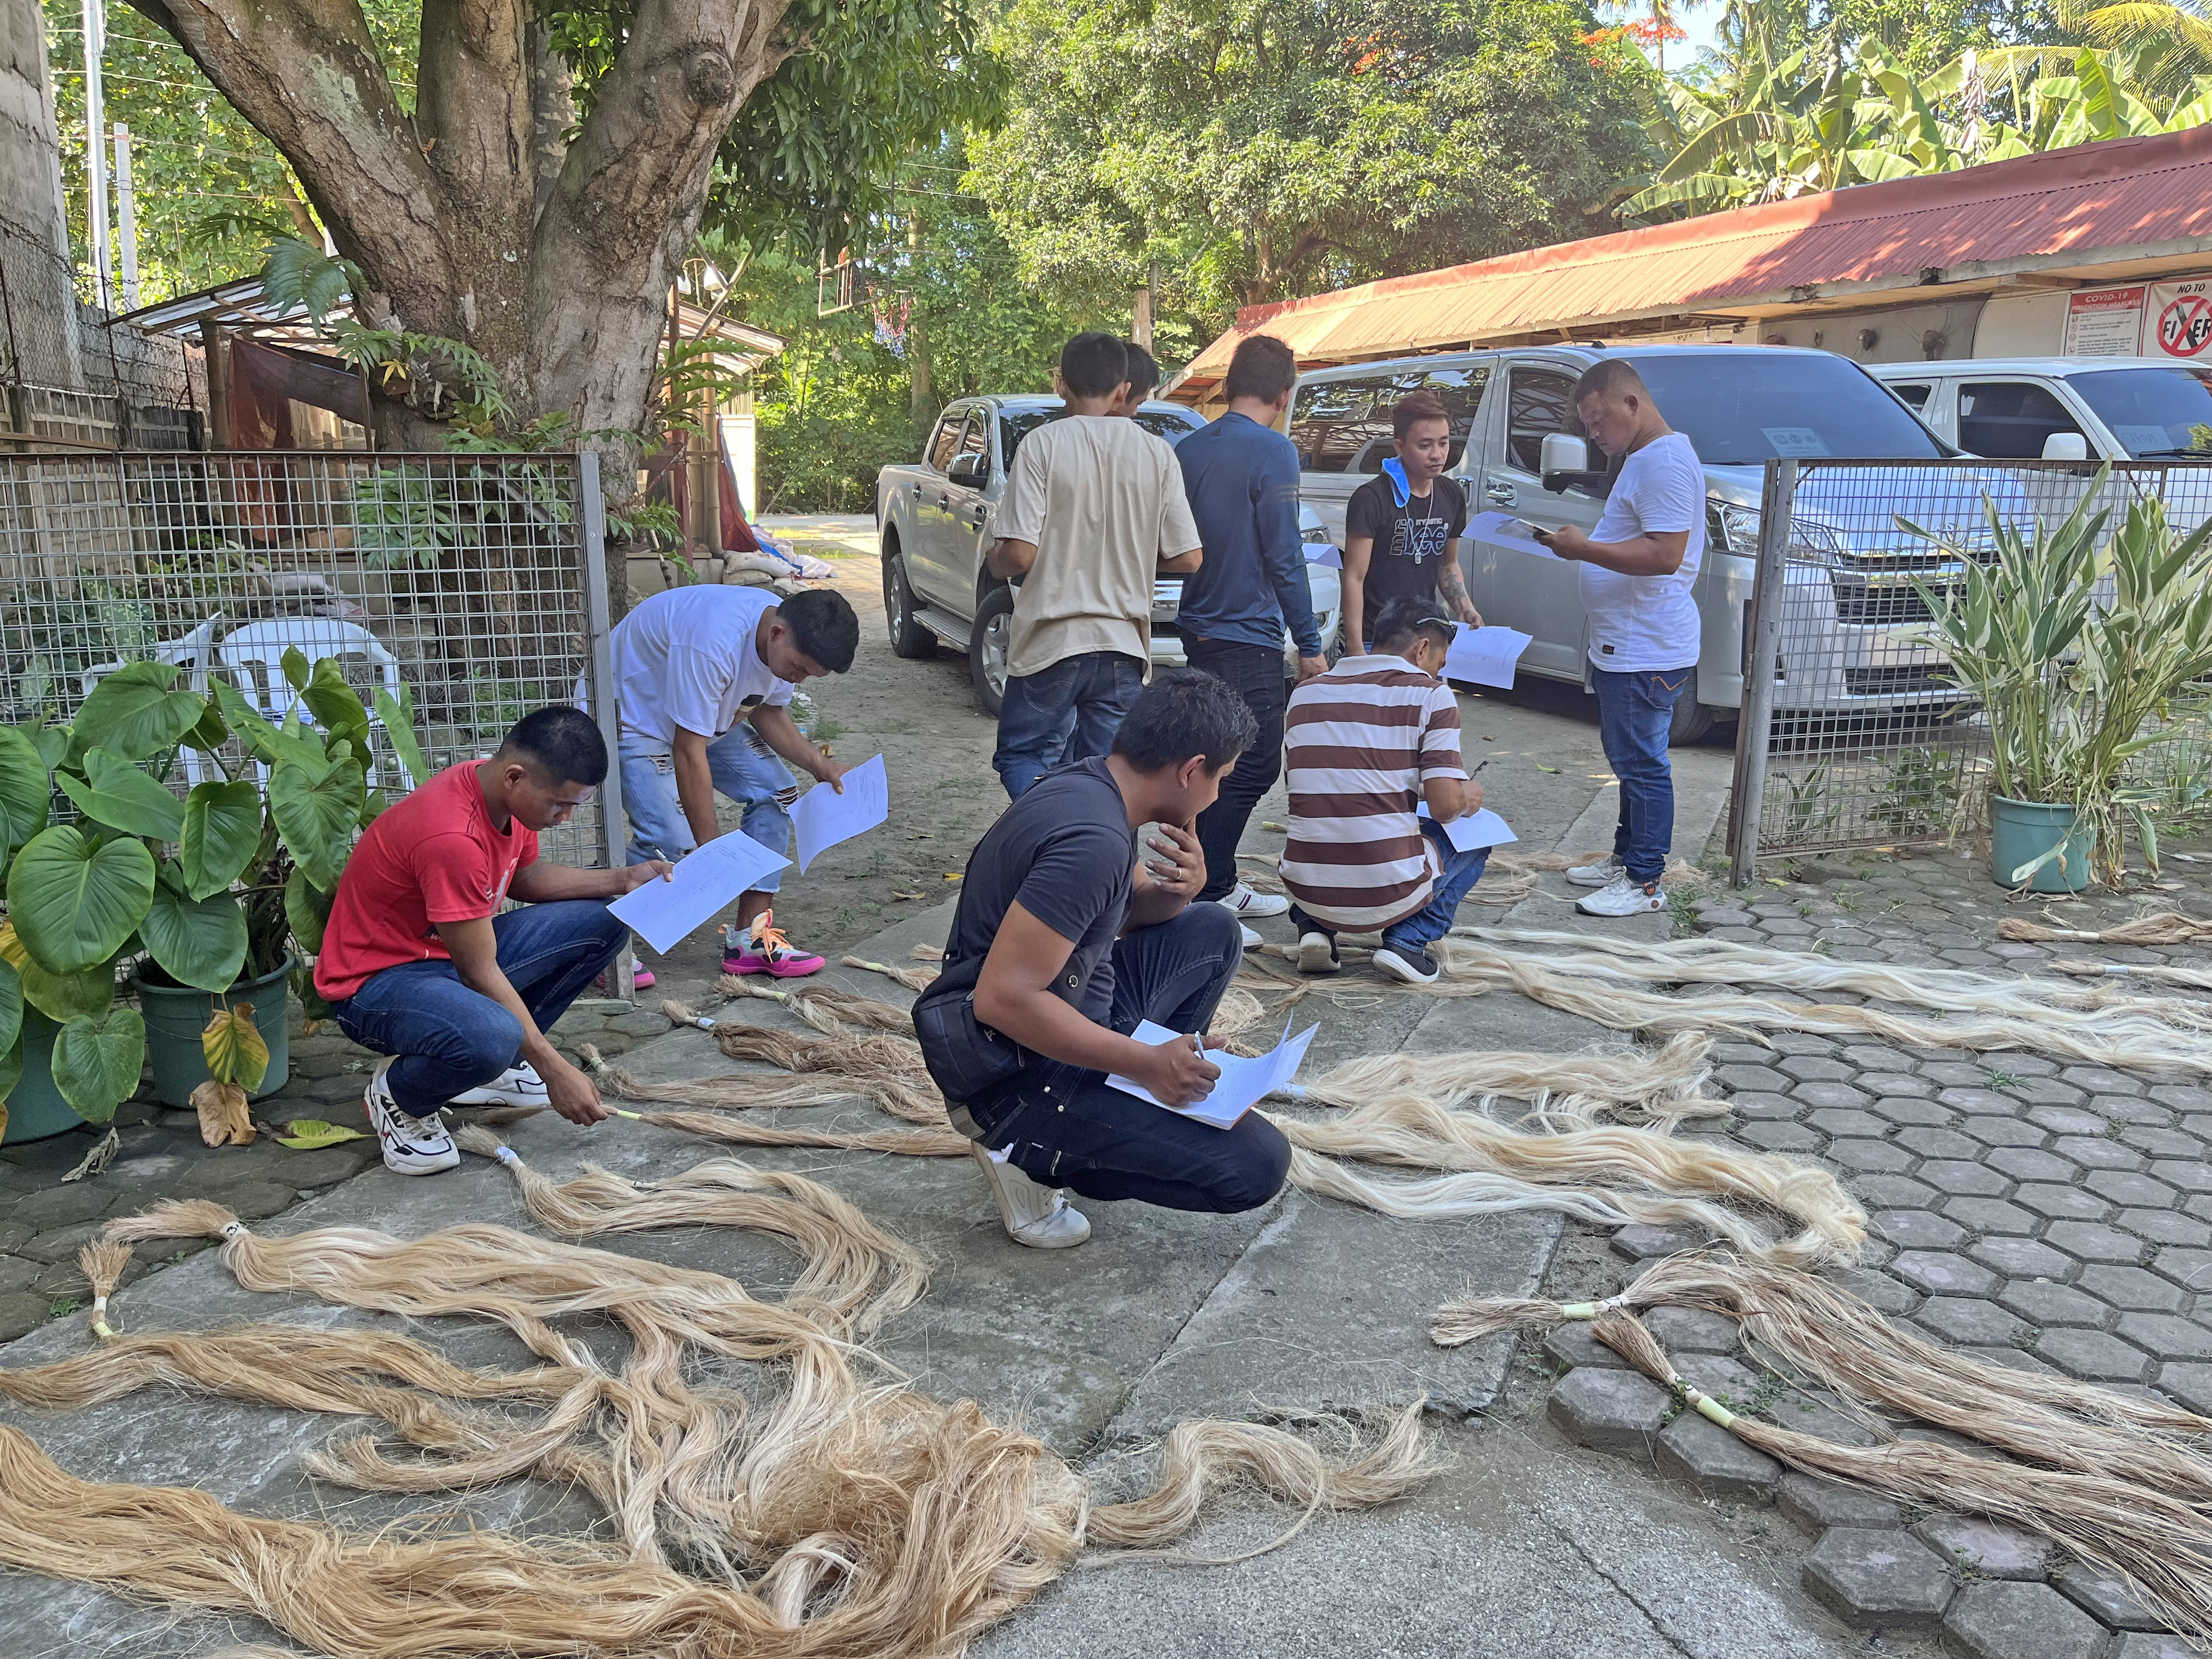 philfida-regional-office-x-conducts-re-orientation-and-re-examination-for-fiber-classifiers/philfida-regional-office-x-conducts-re-orientation-and-re-examination-for-fiber-classifiers 1